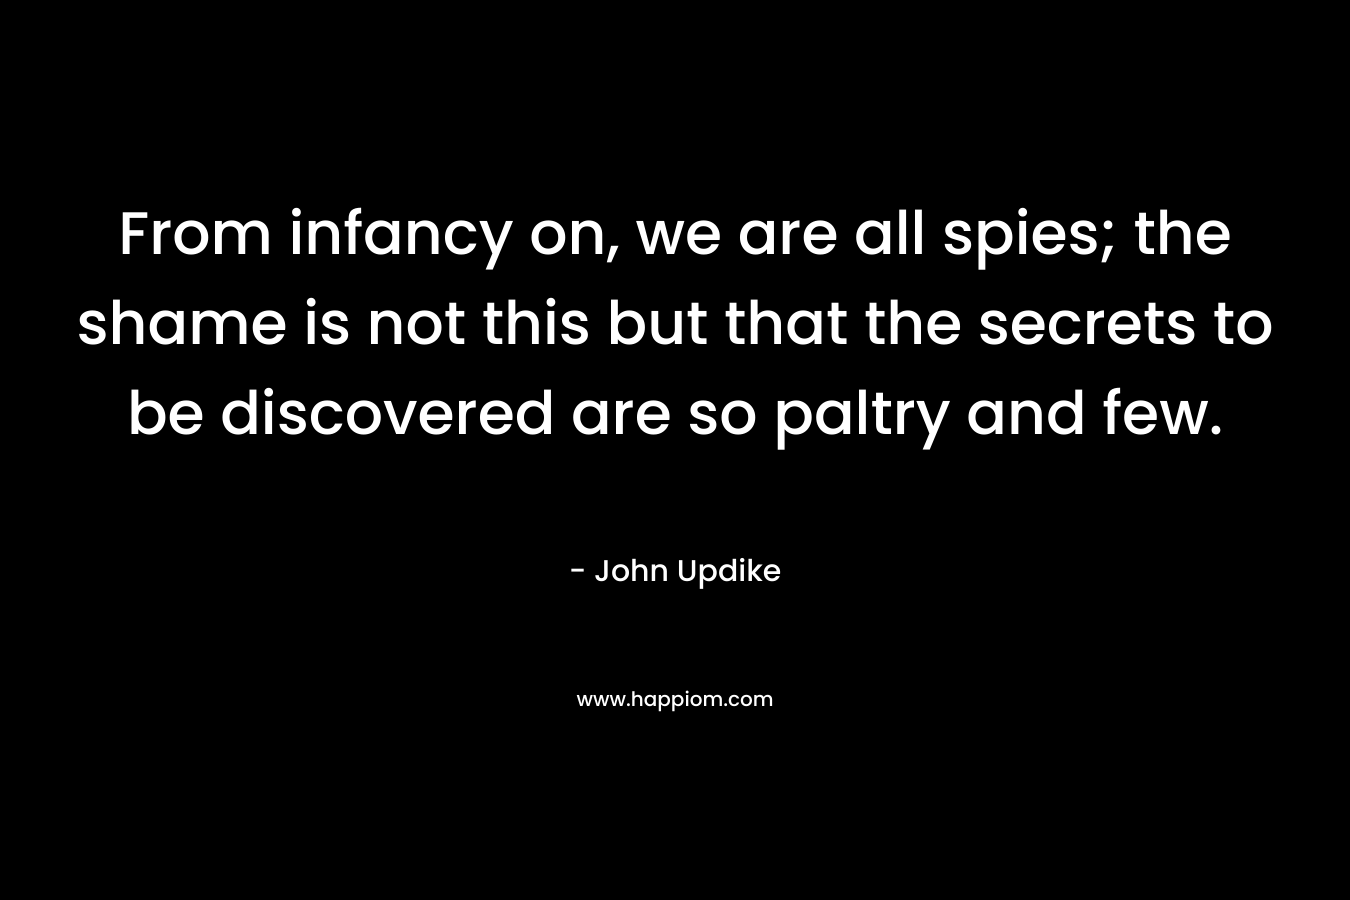 From infancy on, we are all spies; the shame is not this but that the secrets to be discovered are so paltry and few.  – John Updike